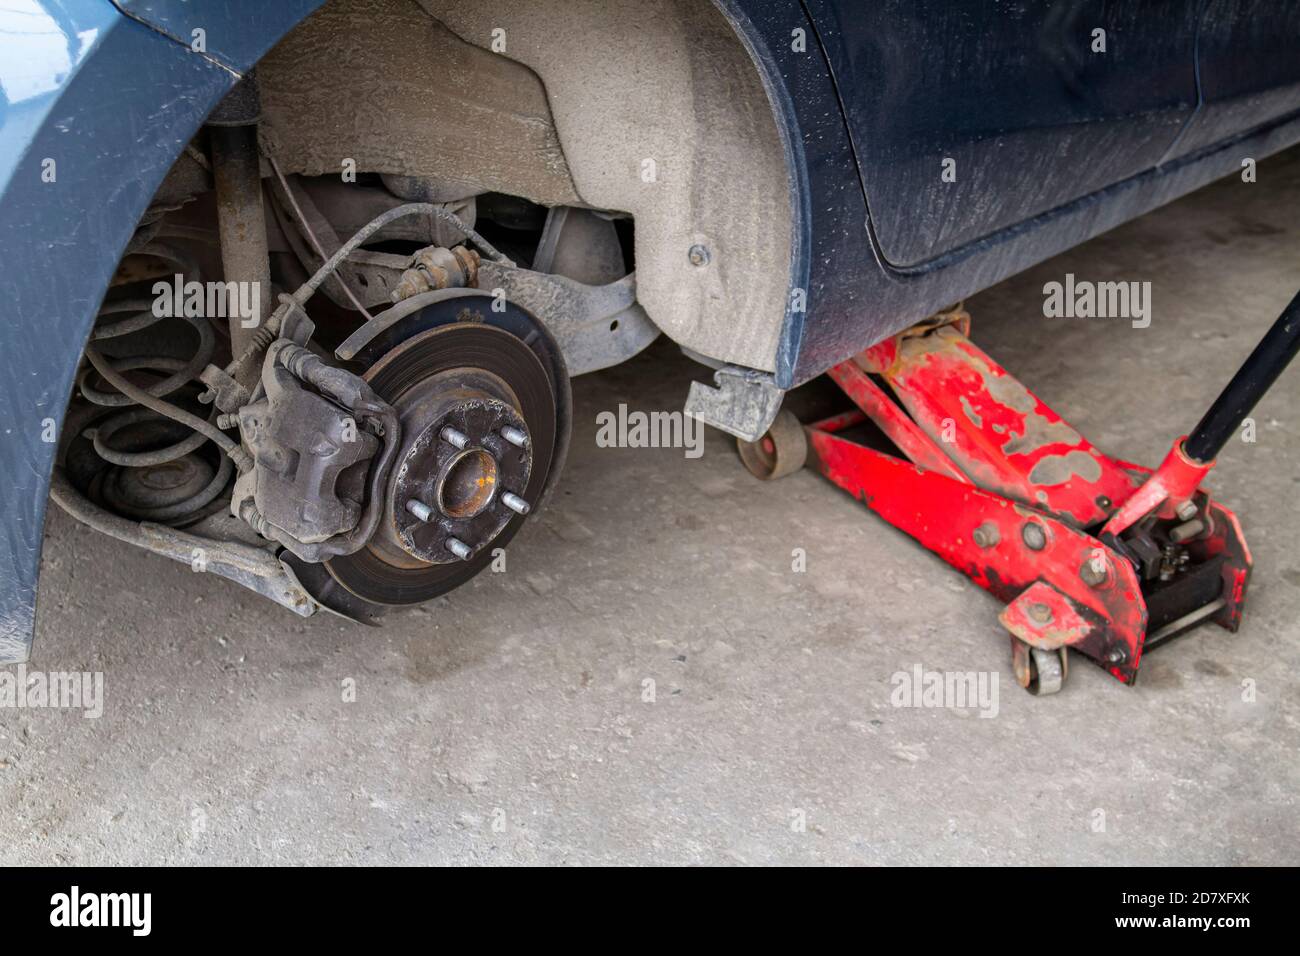 Replacing wheels on a car, jack holds the body in raised position. Car without wheel and lift up by hydraulic, waiting for tire replacement. Stock Photo